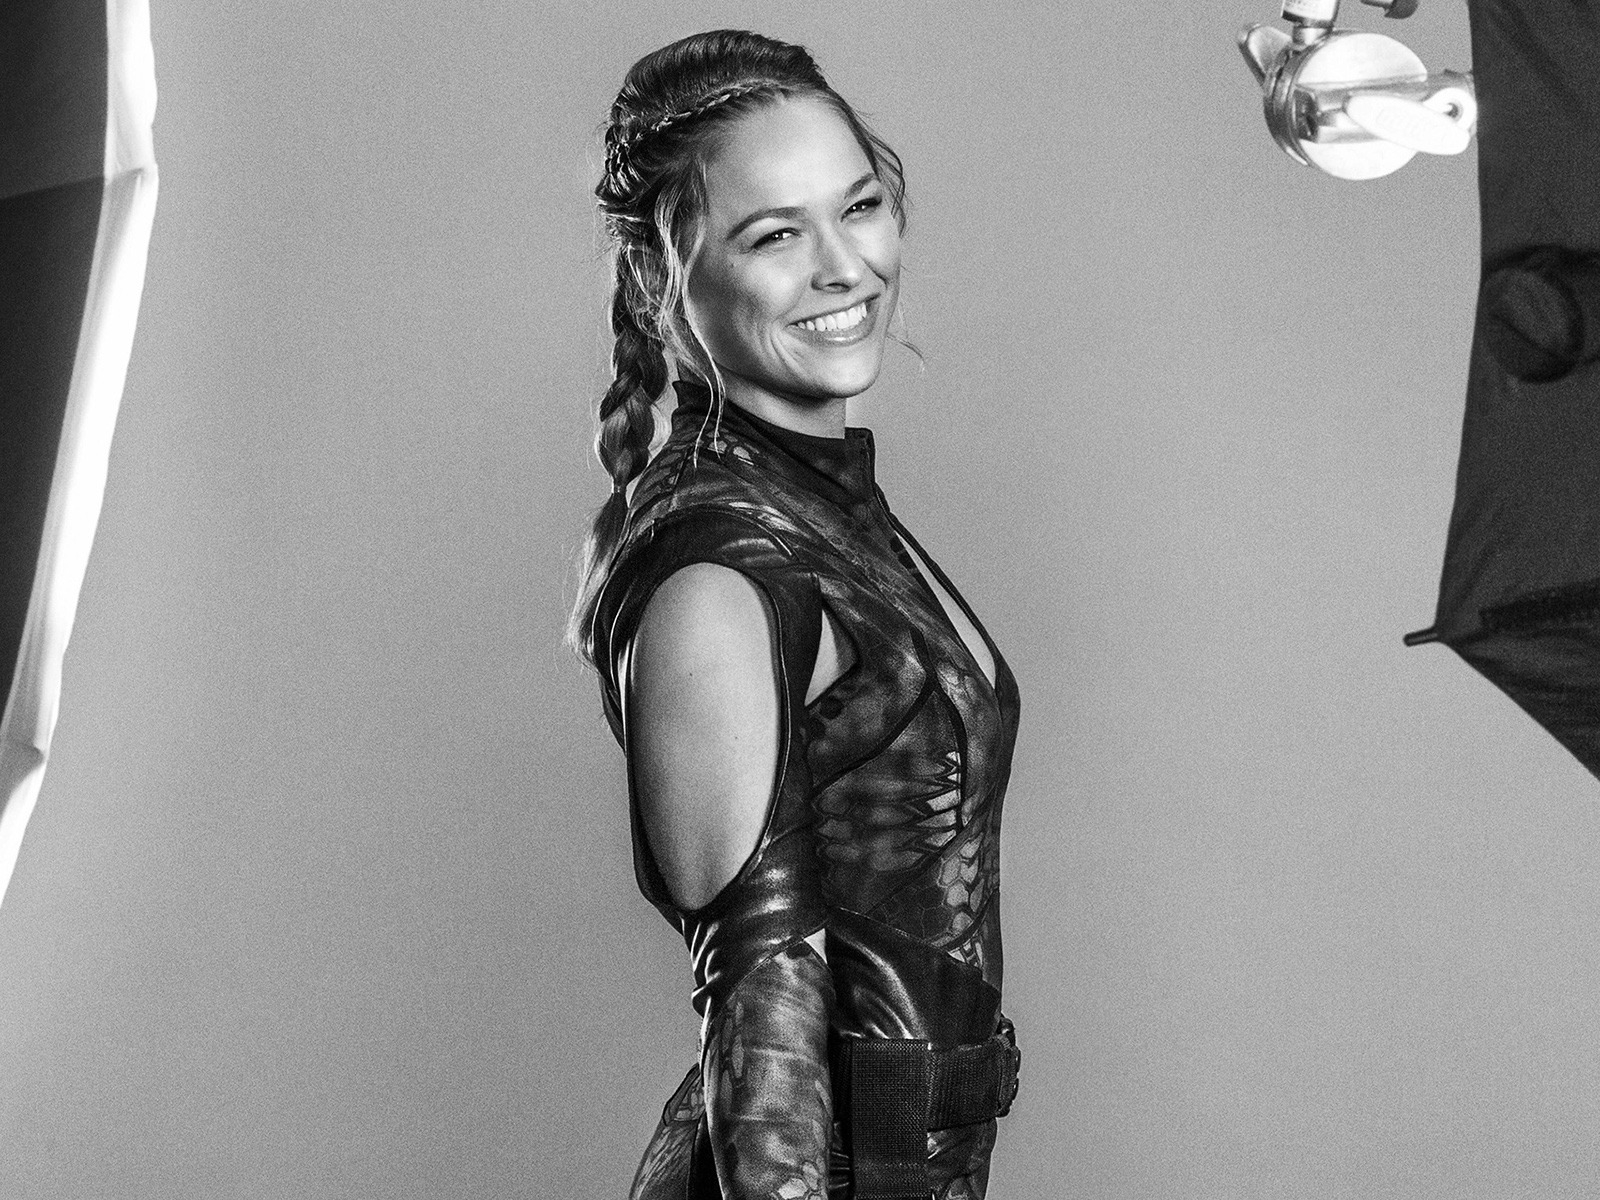 Ronda Rousey The Expendables 3 for 1600 x 1200 resolution